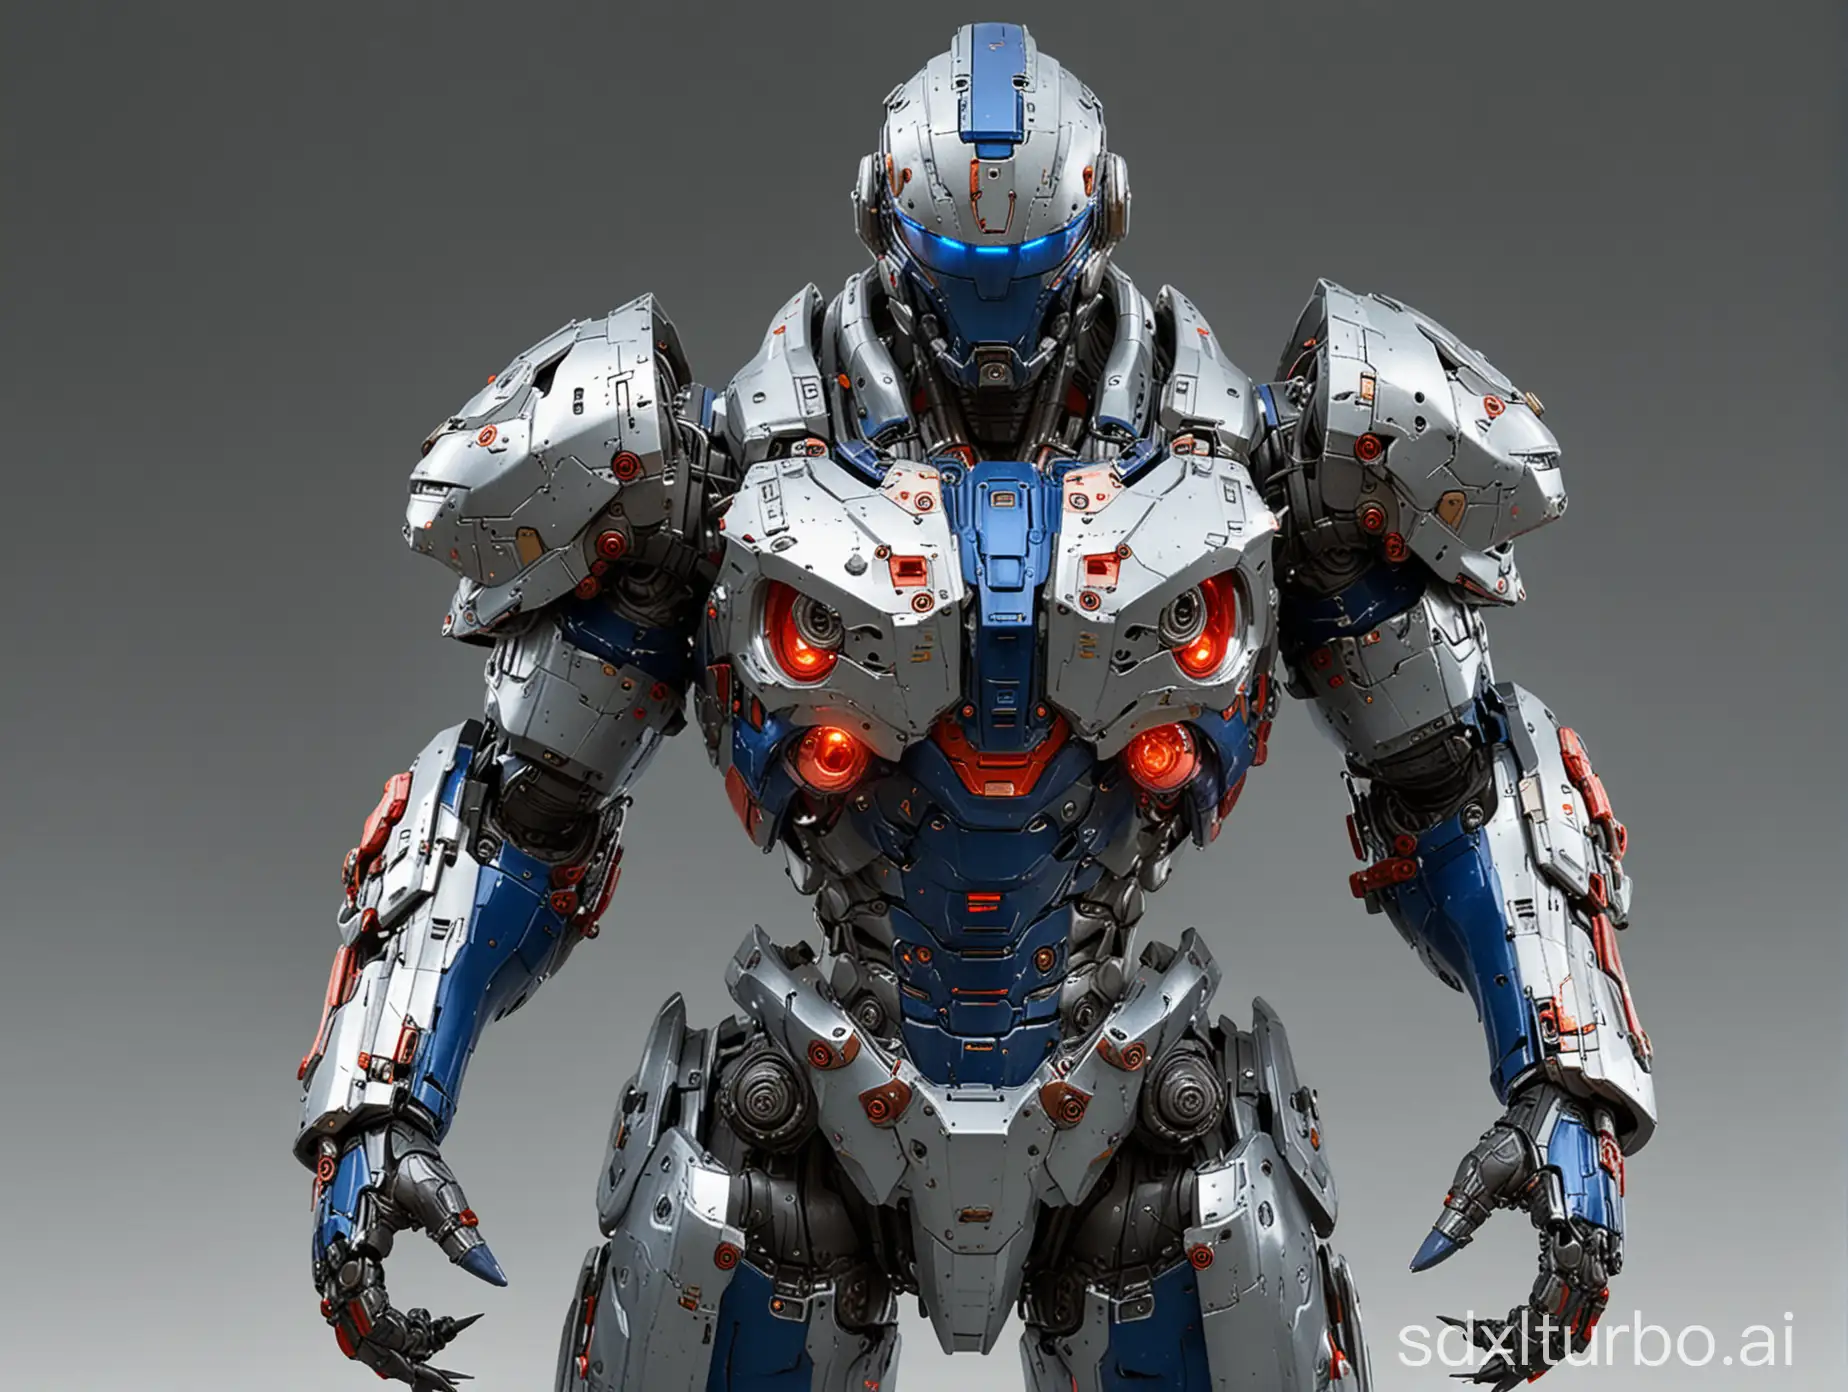 Futuristic-Ultimate-Guardian-Nanometer-Alloy-Mech-with-Electromagnetic-Cannon-and-Energy-Shield